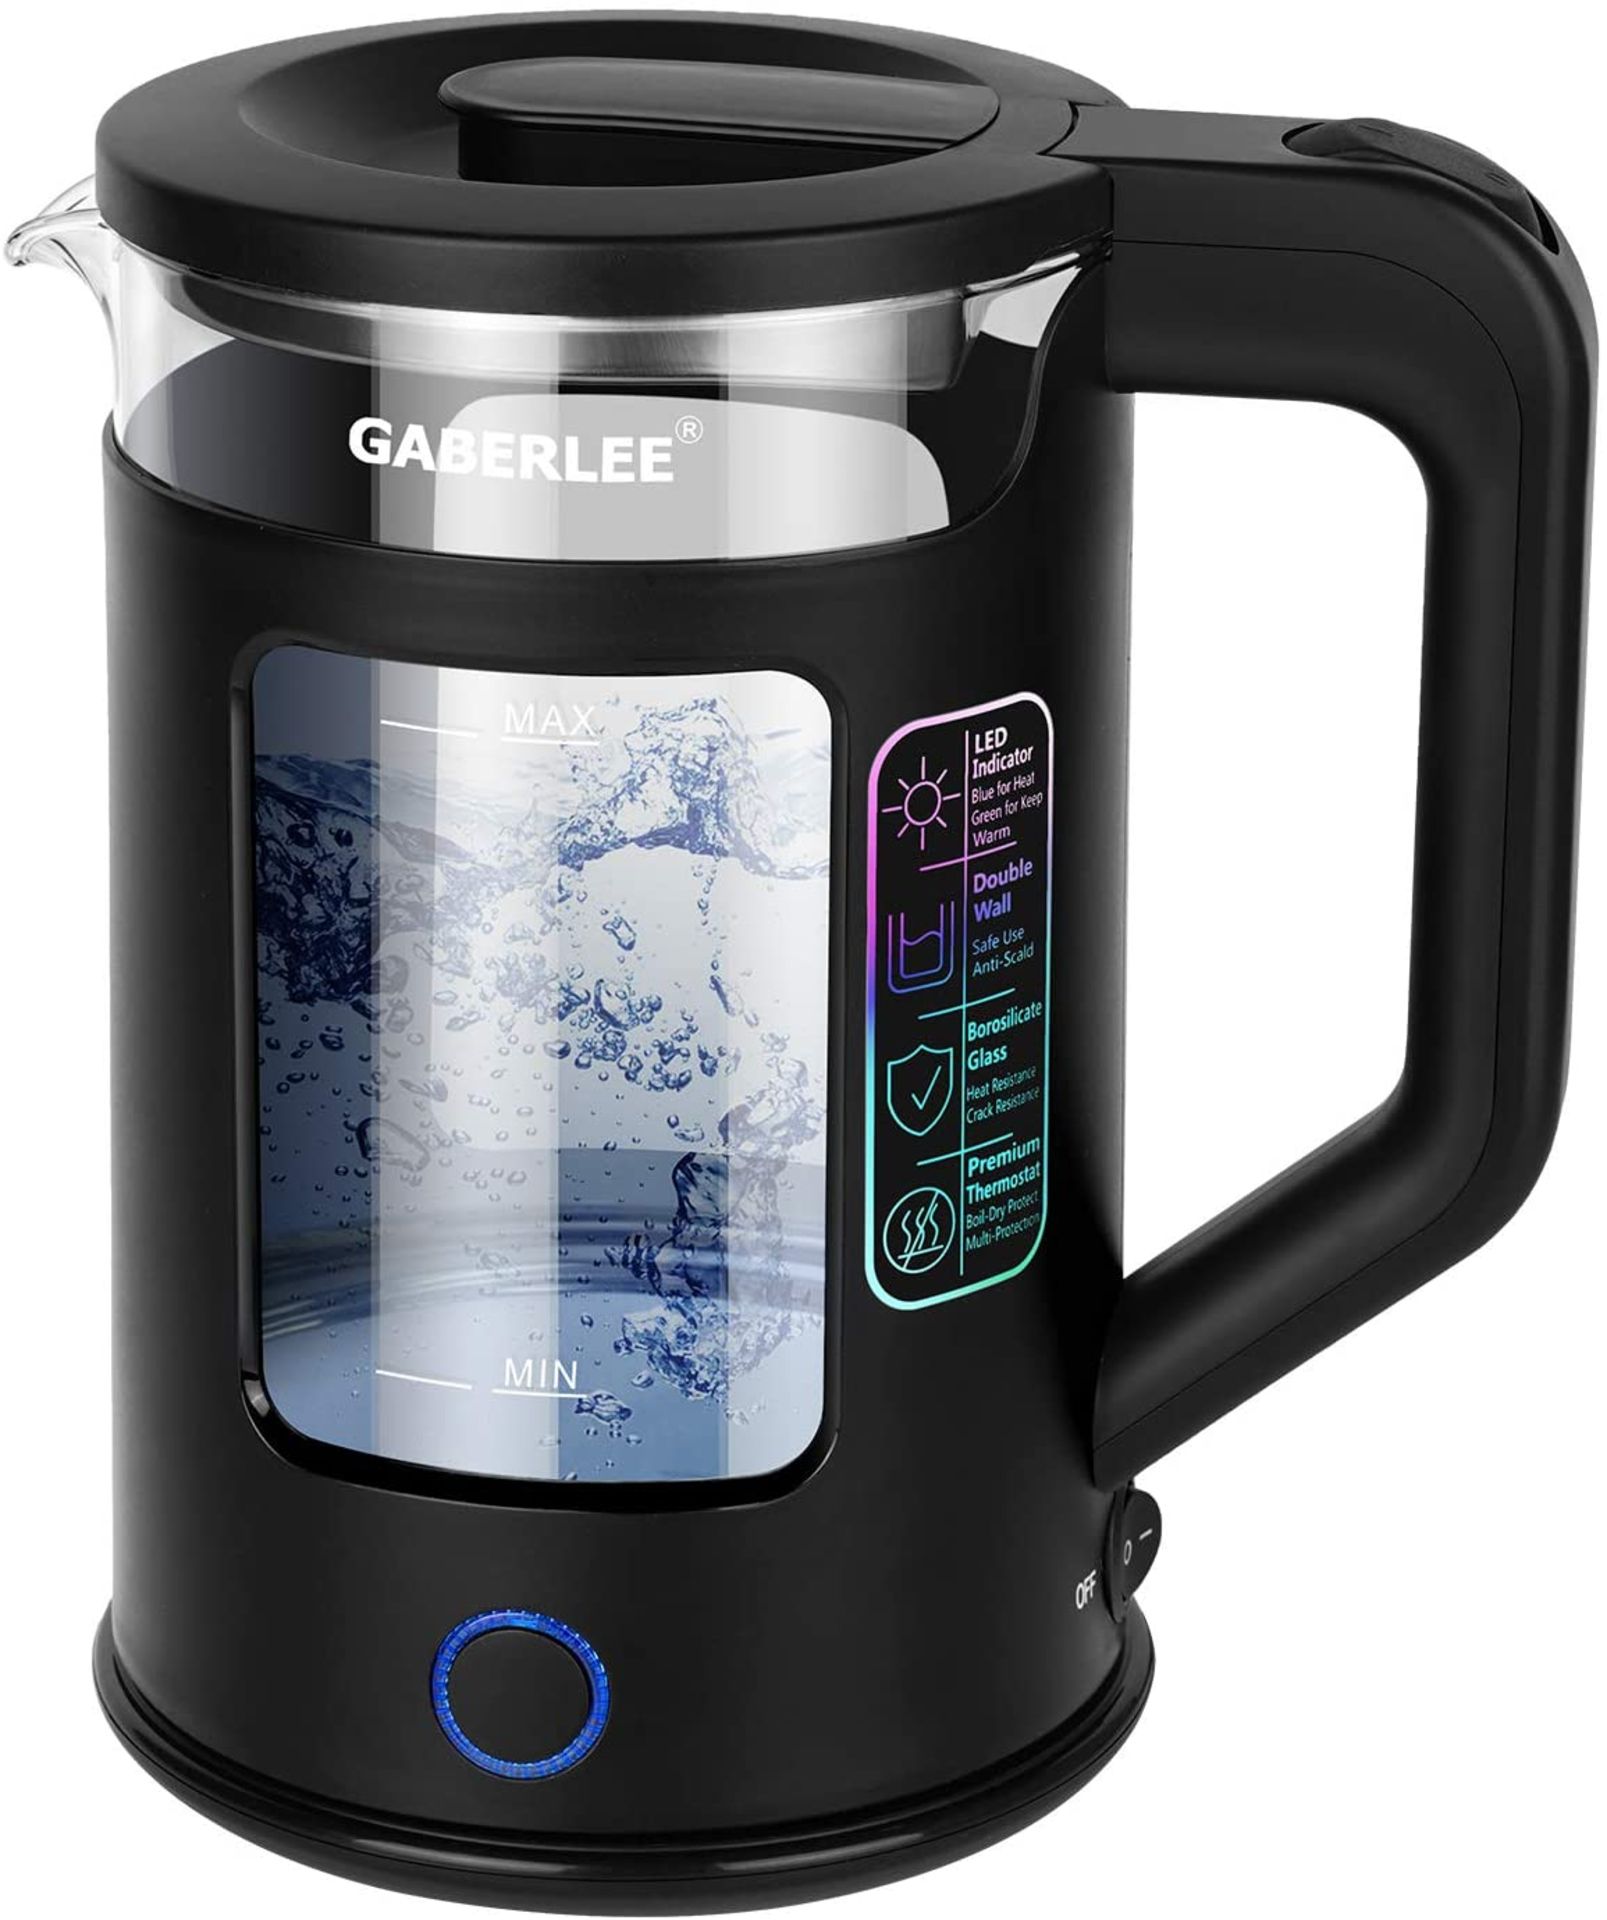 X 2 GABERLEE ELECTRIC KETTLES 1.7L COMBINED RRP £60Condition ReportAppraisal Available on